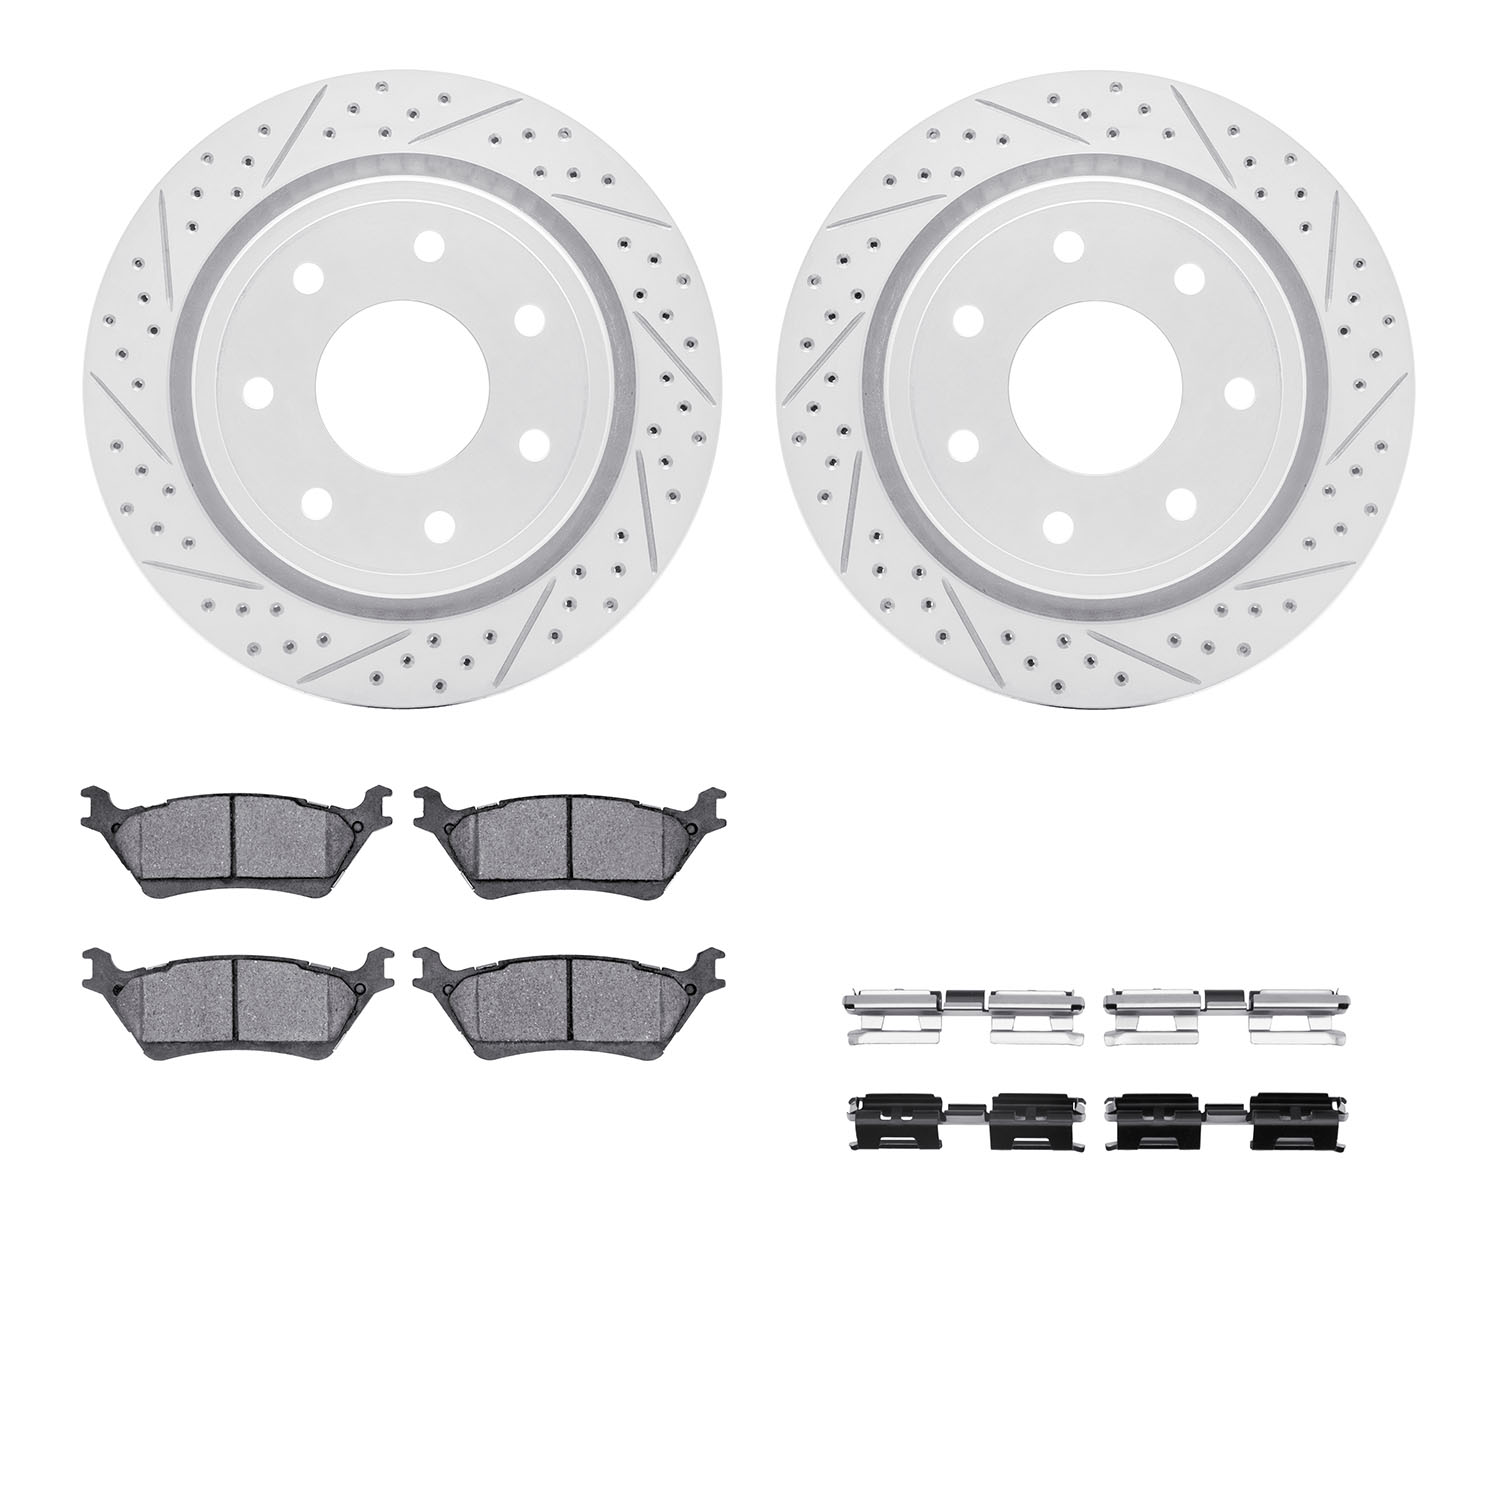 2212-54011 Geoperformance Drilled/Slotted Rotors w/Heavy-Duty Pads Kit & Hardware, 2012-2014 Ford/Lincoln/Mercury/Mazda, Positio